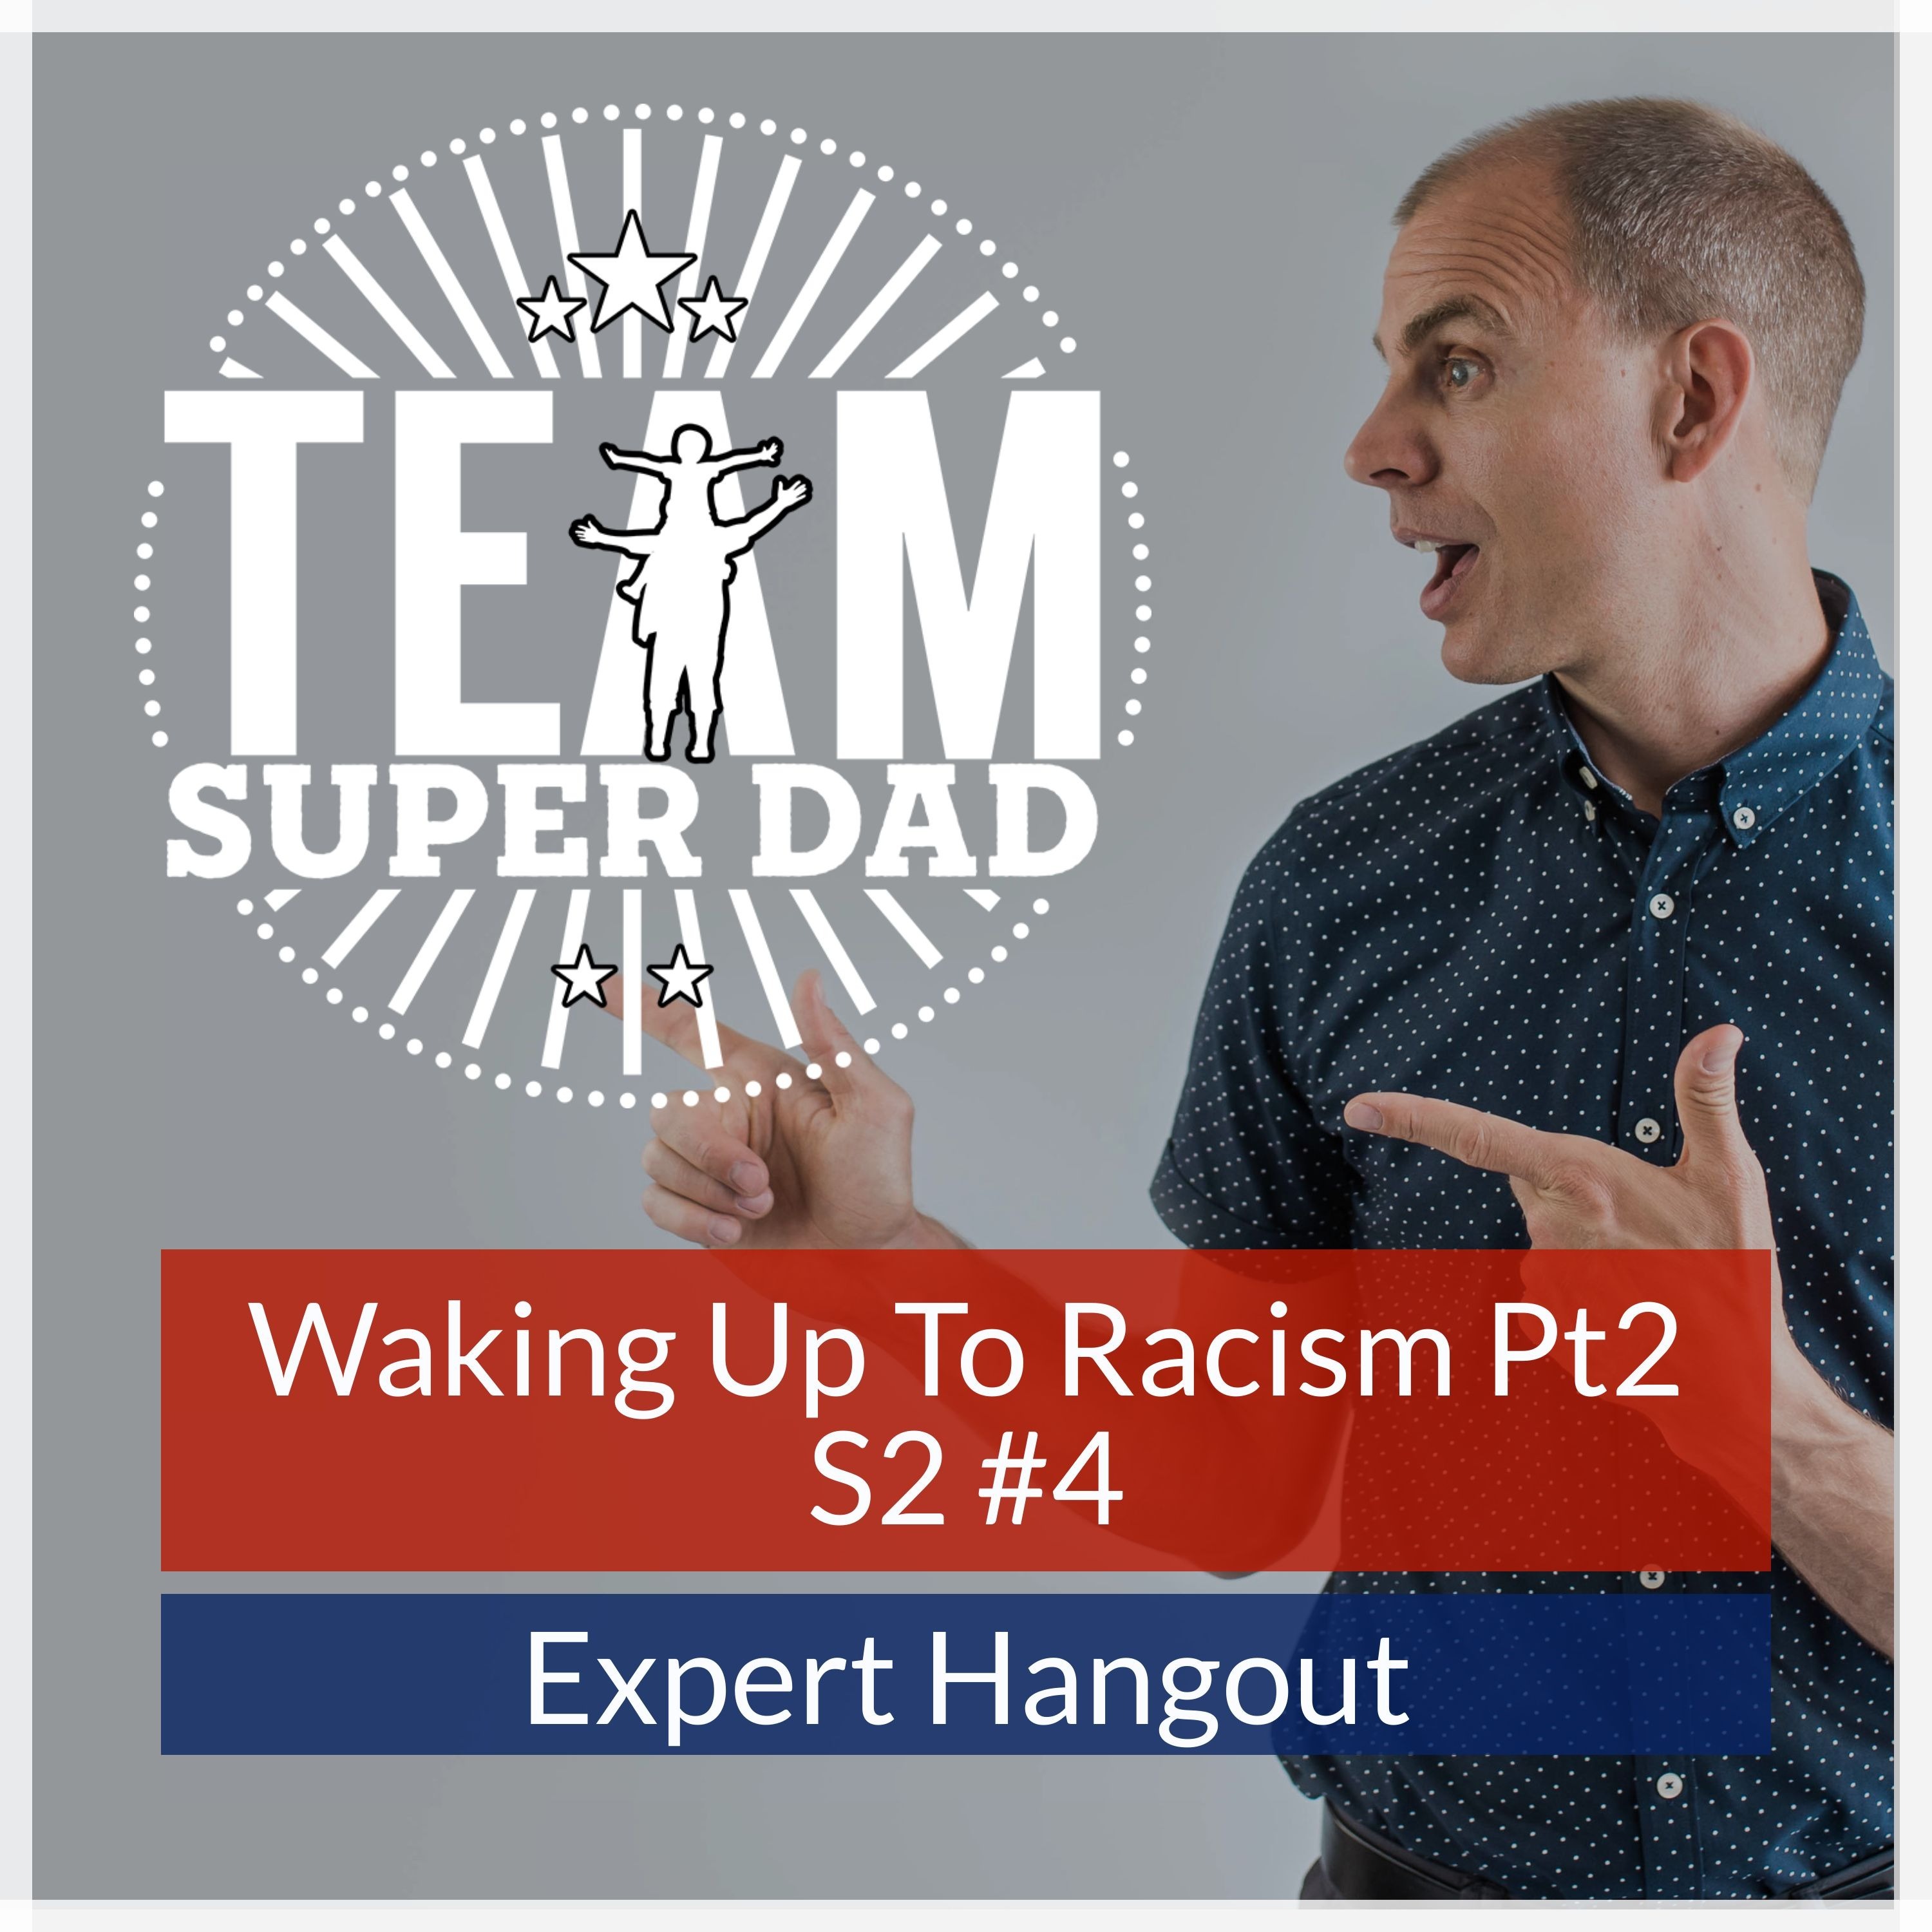 Waking Up To Racism Pt2 - Expert Hangout Podcast